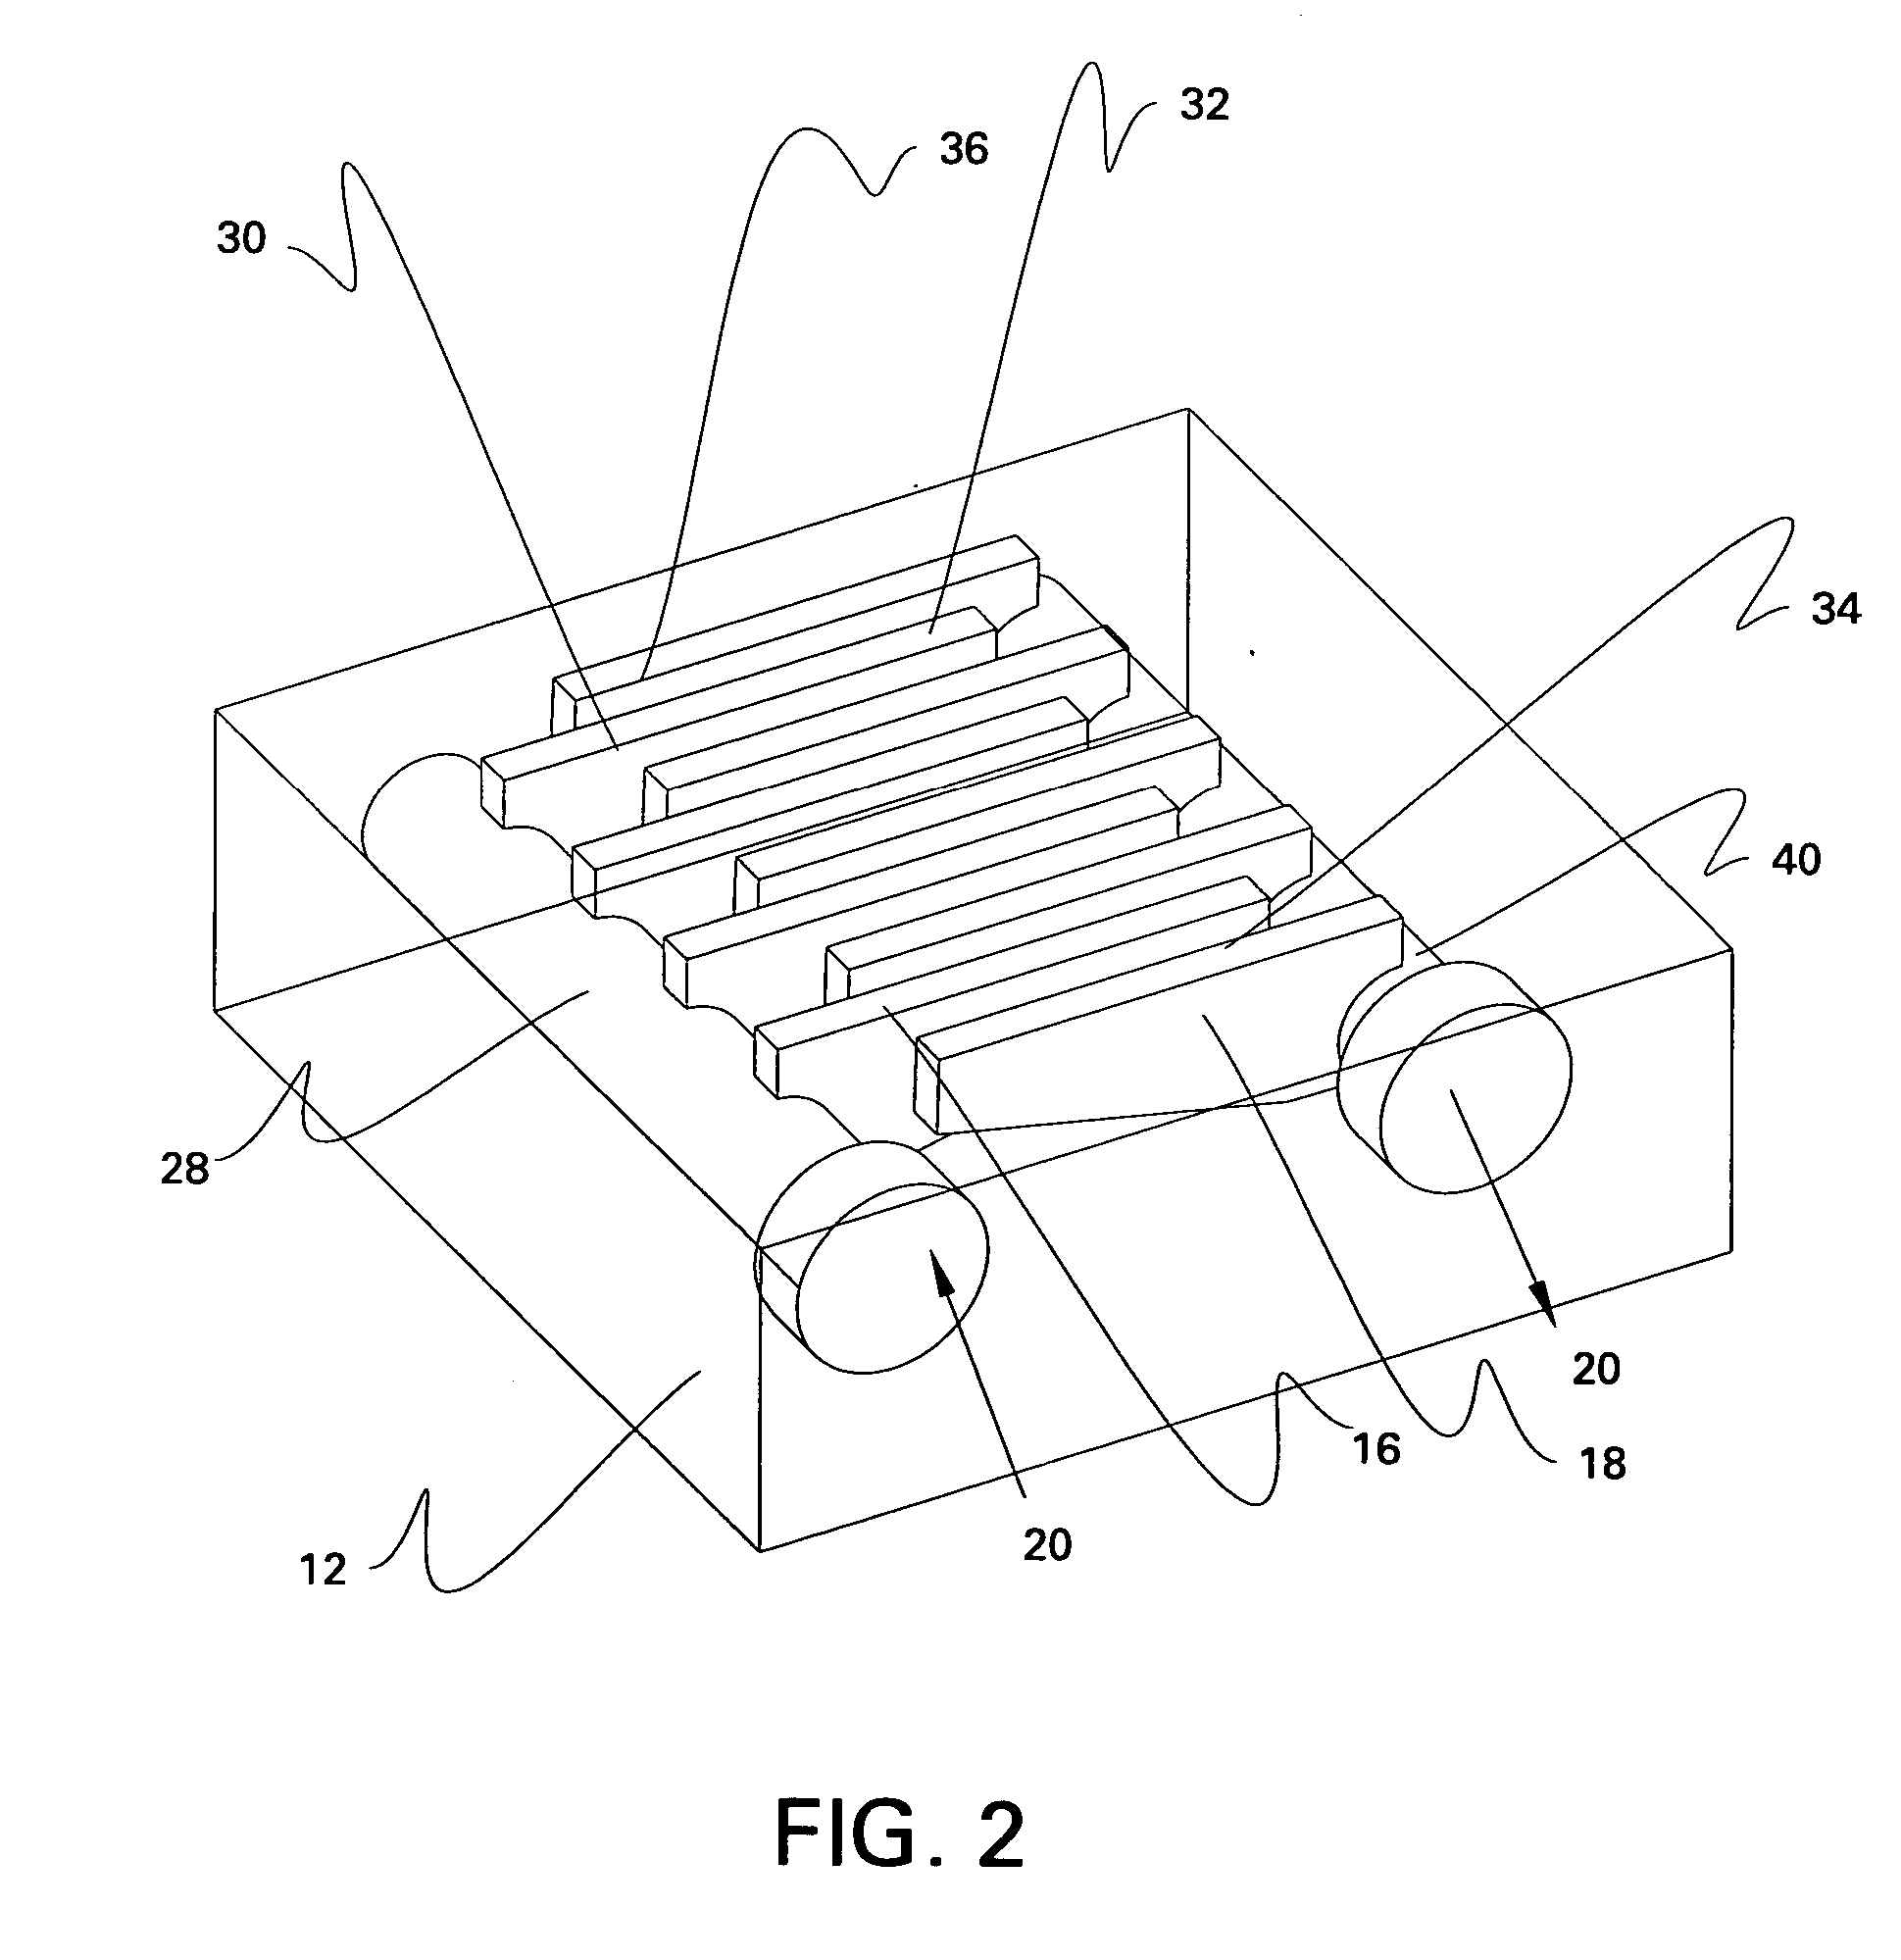 Heat sink with microchannel cooling for power devices